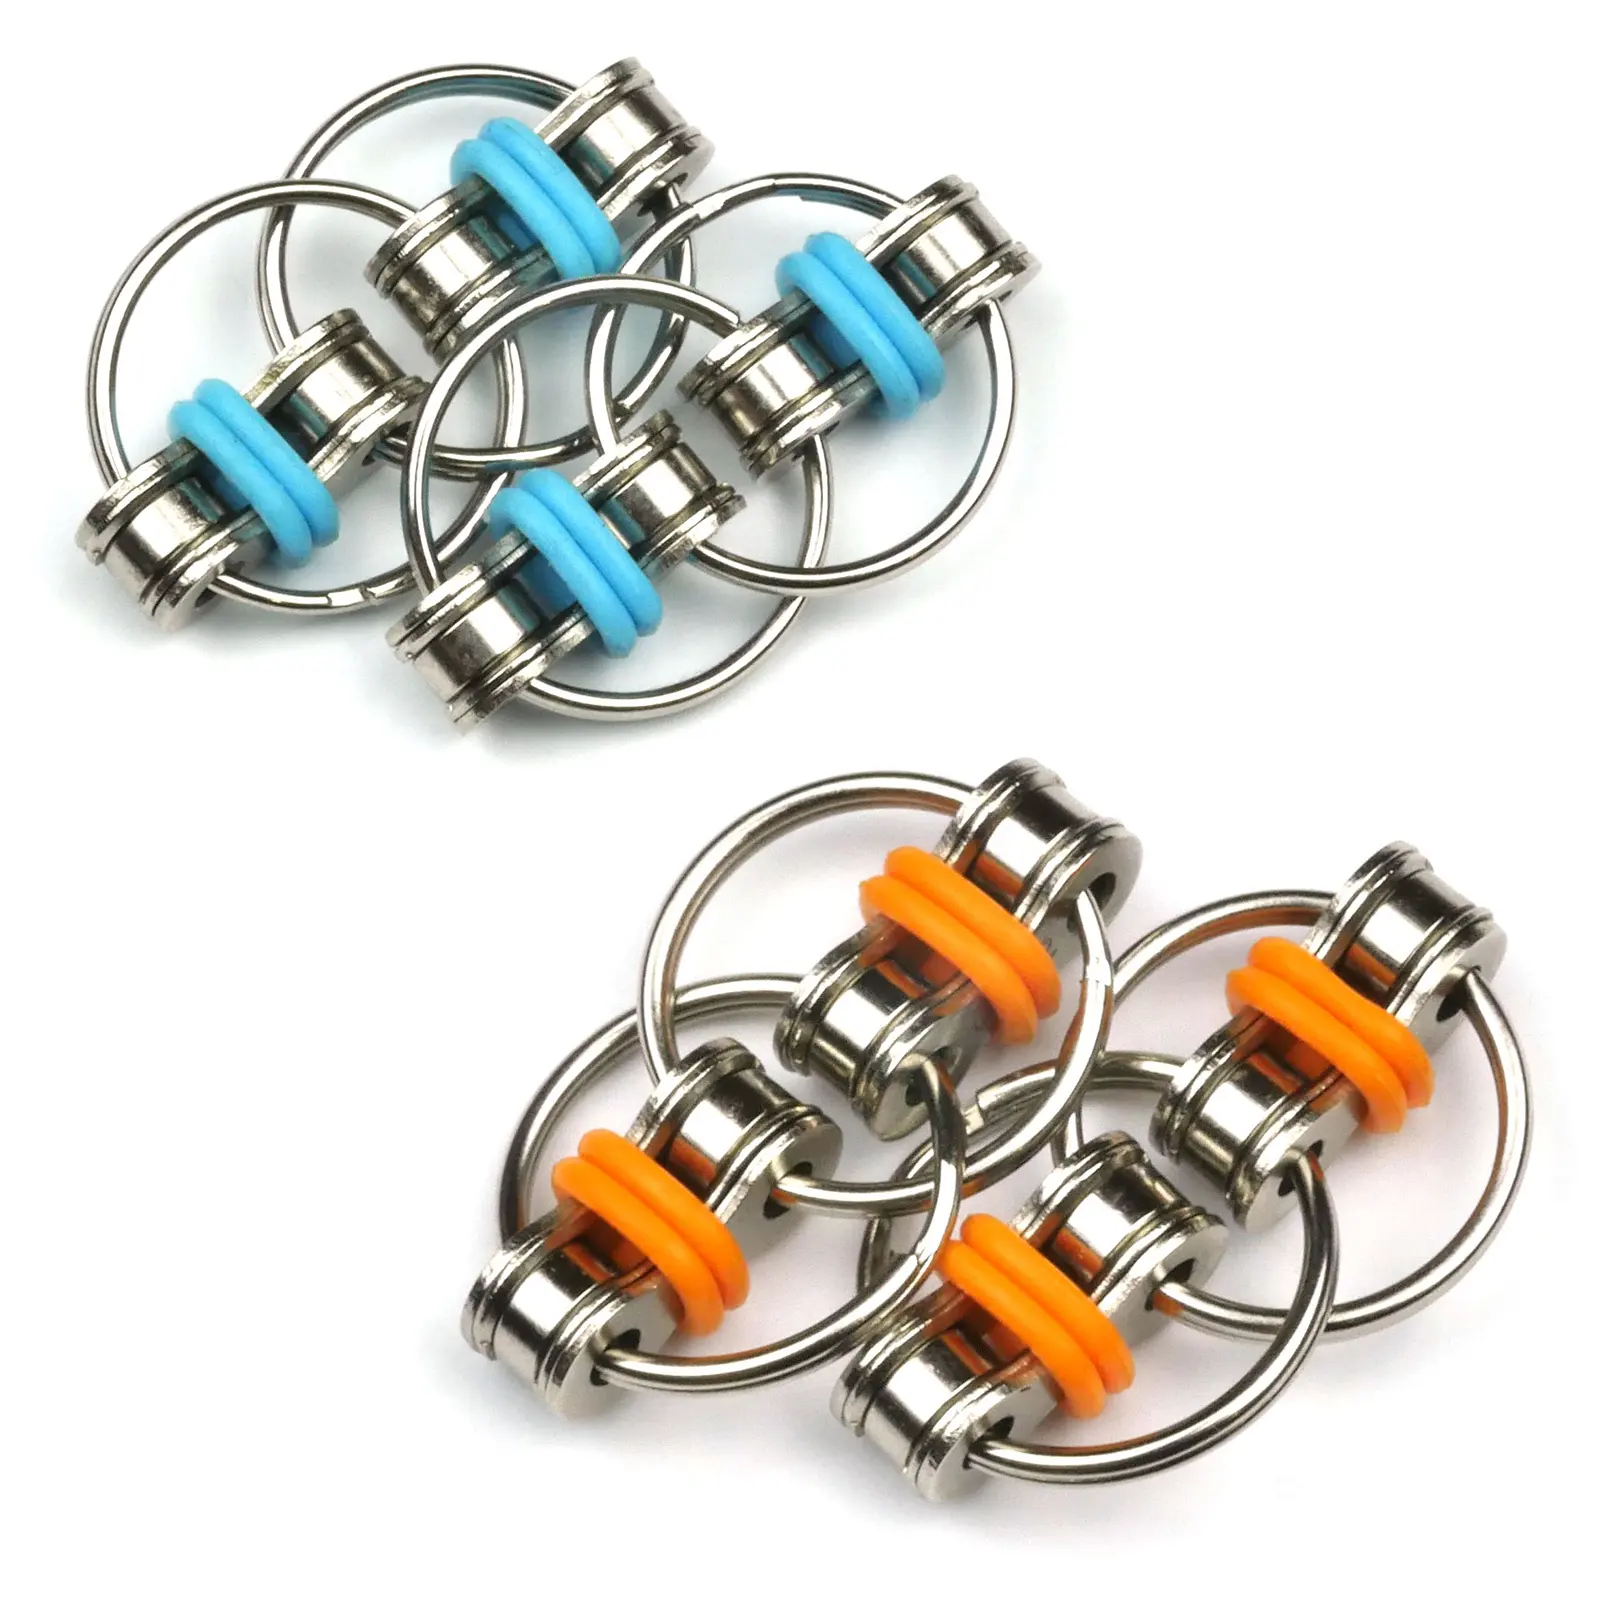 Metal Alloy Fidget Works Flippy Key Chain Hand Spinner Controlled Fidget Toy Hand Spinner For Autism